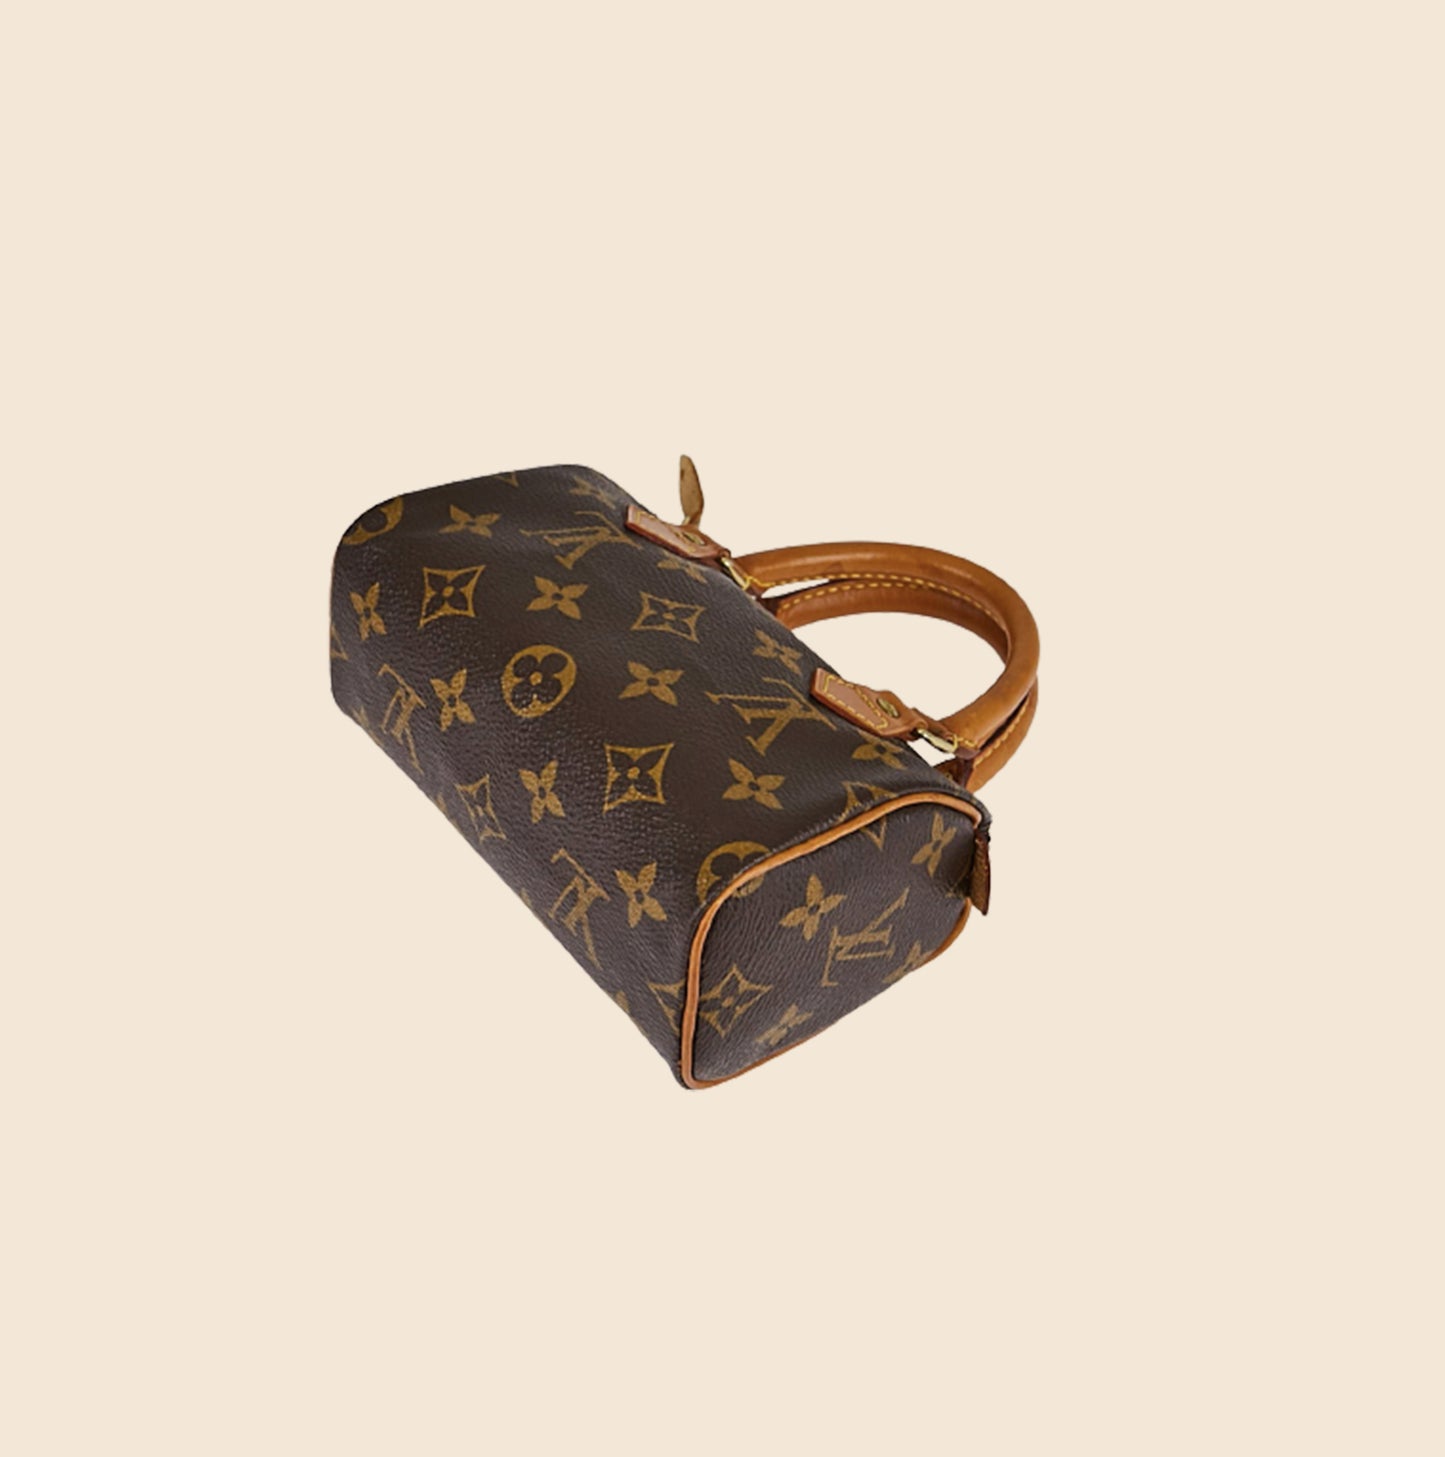 Louis Vuitton 1990-2000s pre-owned Speedy mini tote bag - Black - Realry:  Your Fashion Search Engine